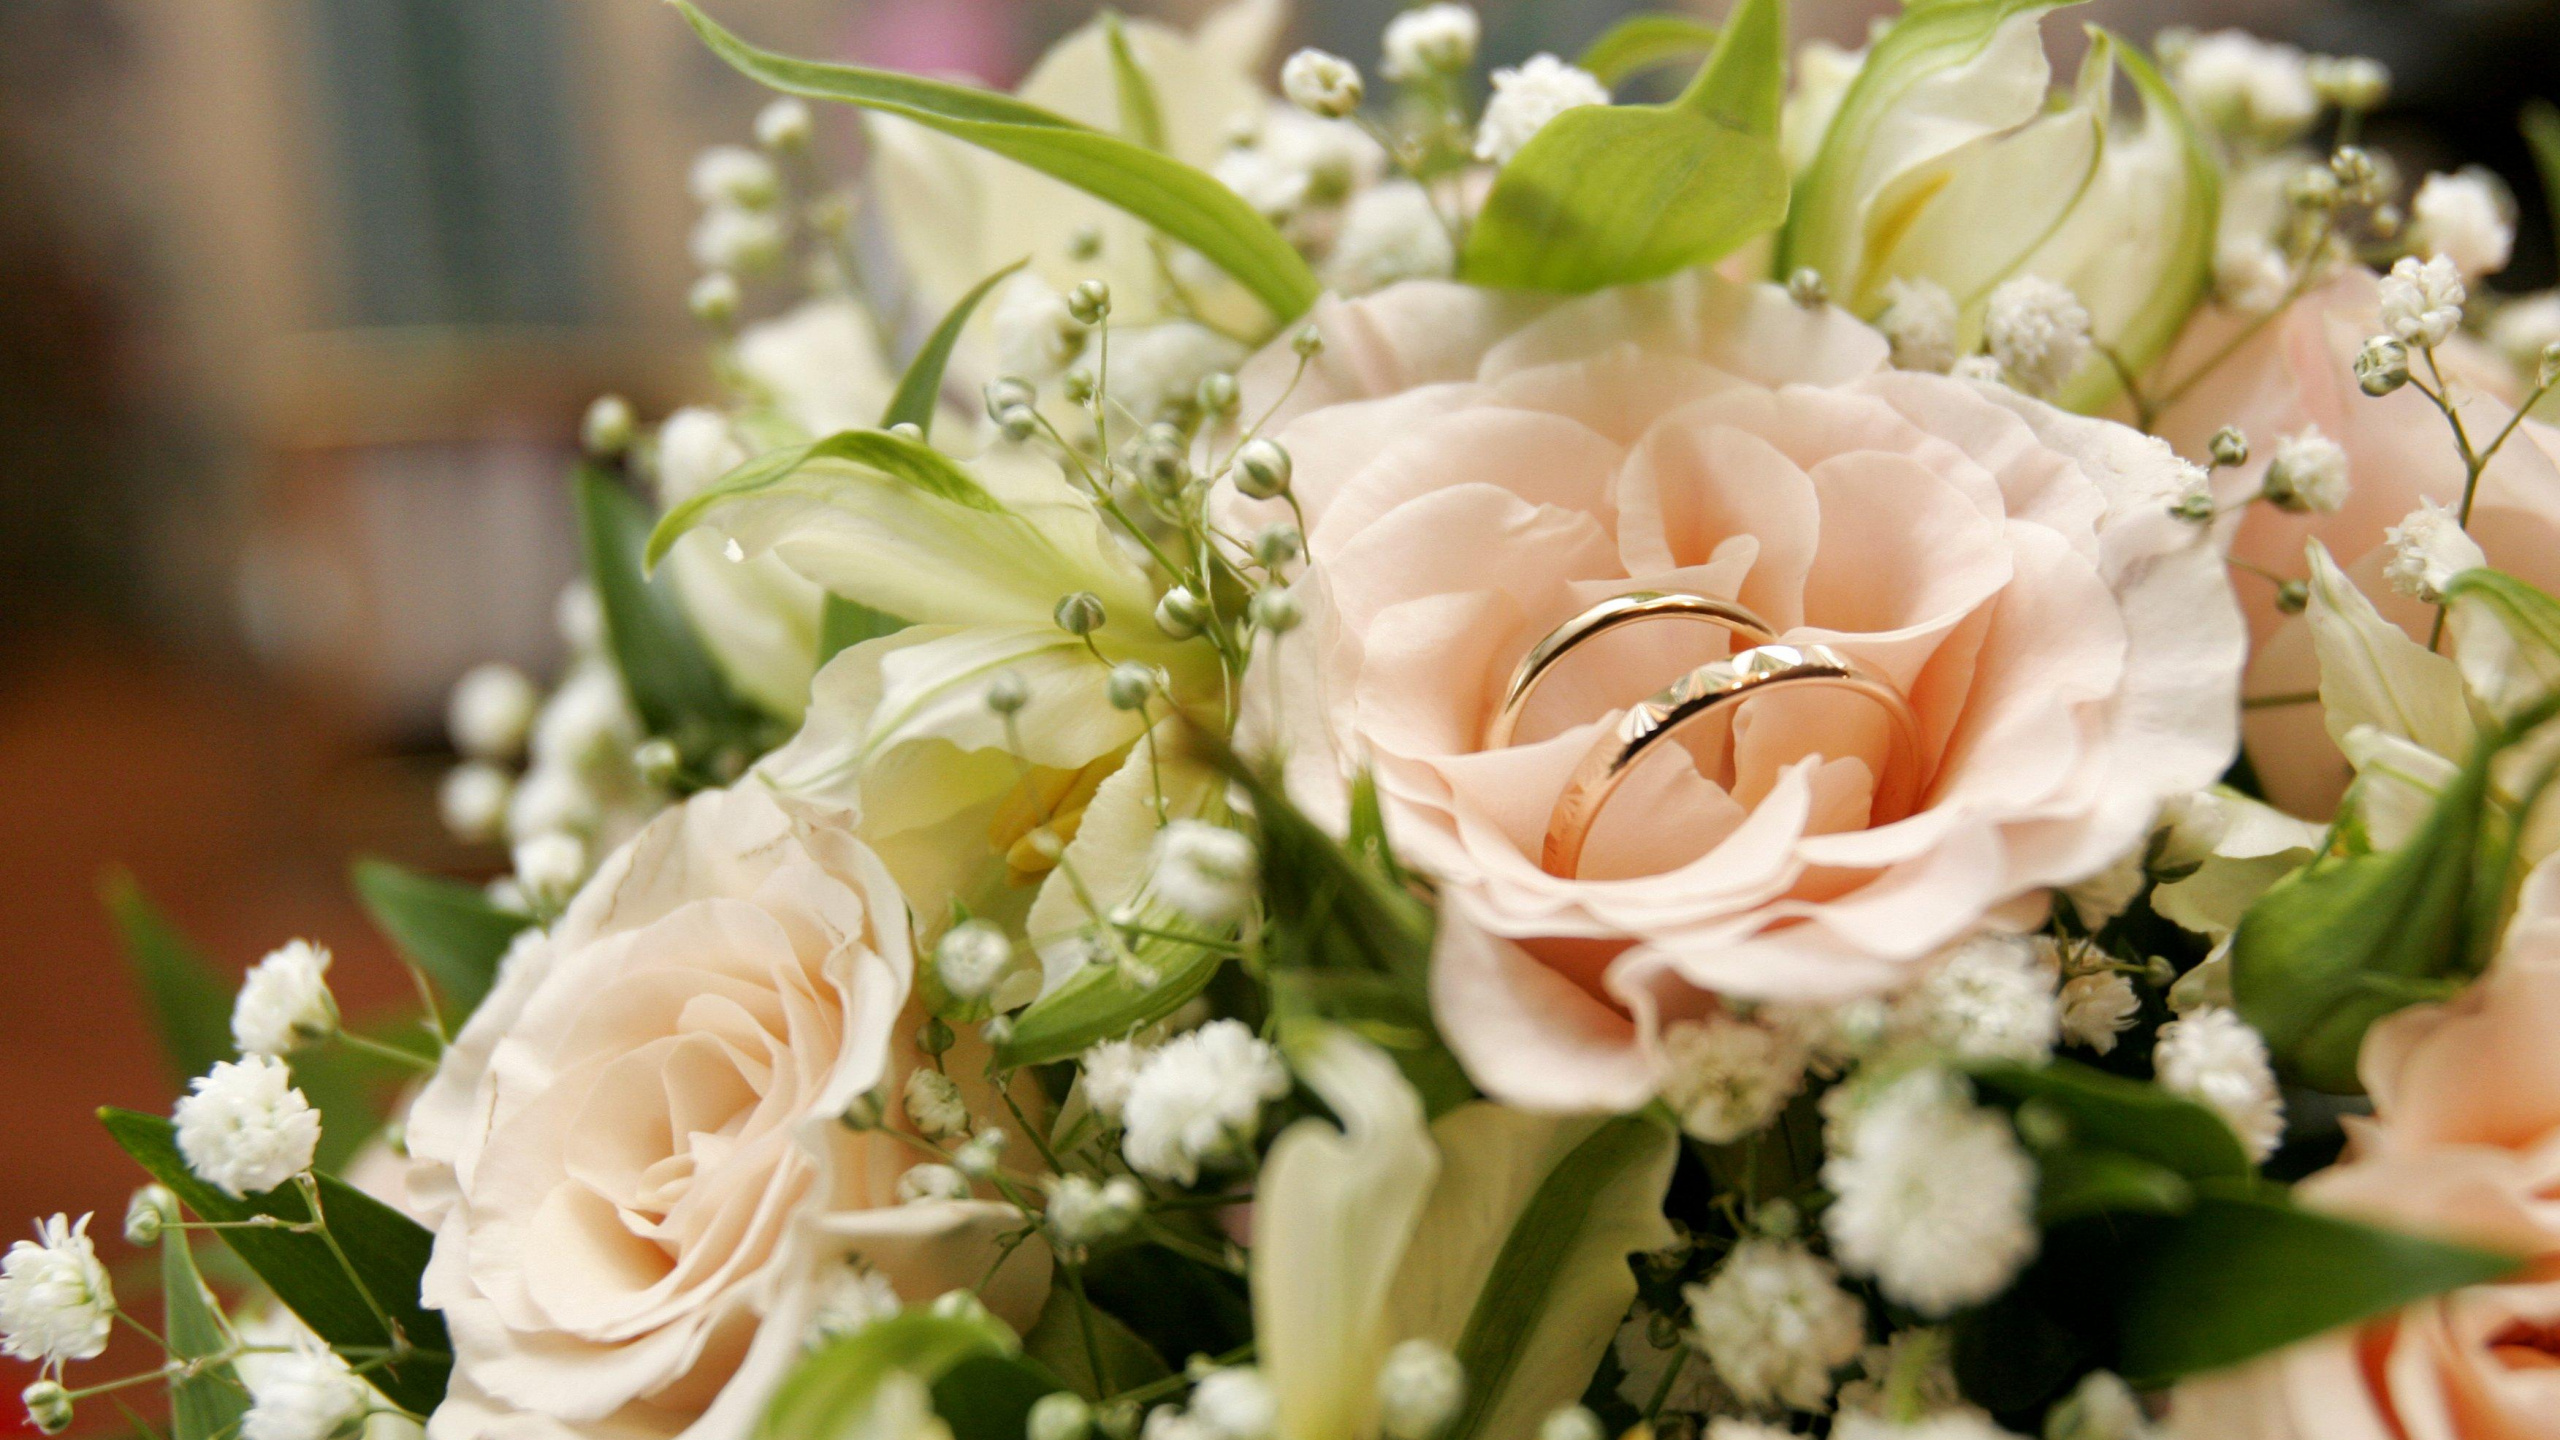 White Roses Bouquet in Close up Photography. Wallpaper in 2560x1440 Resolution